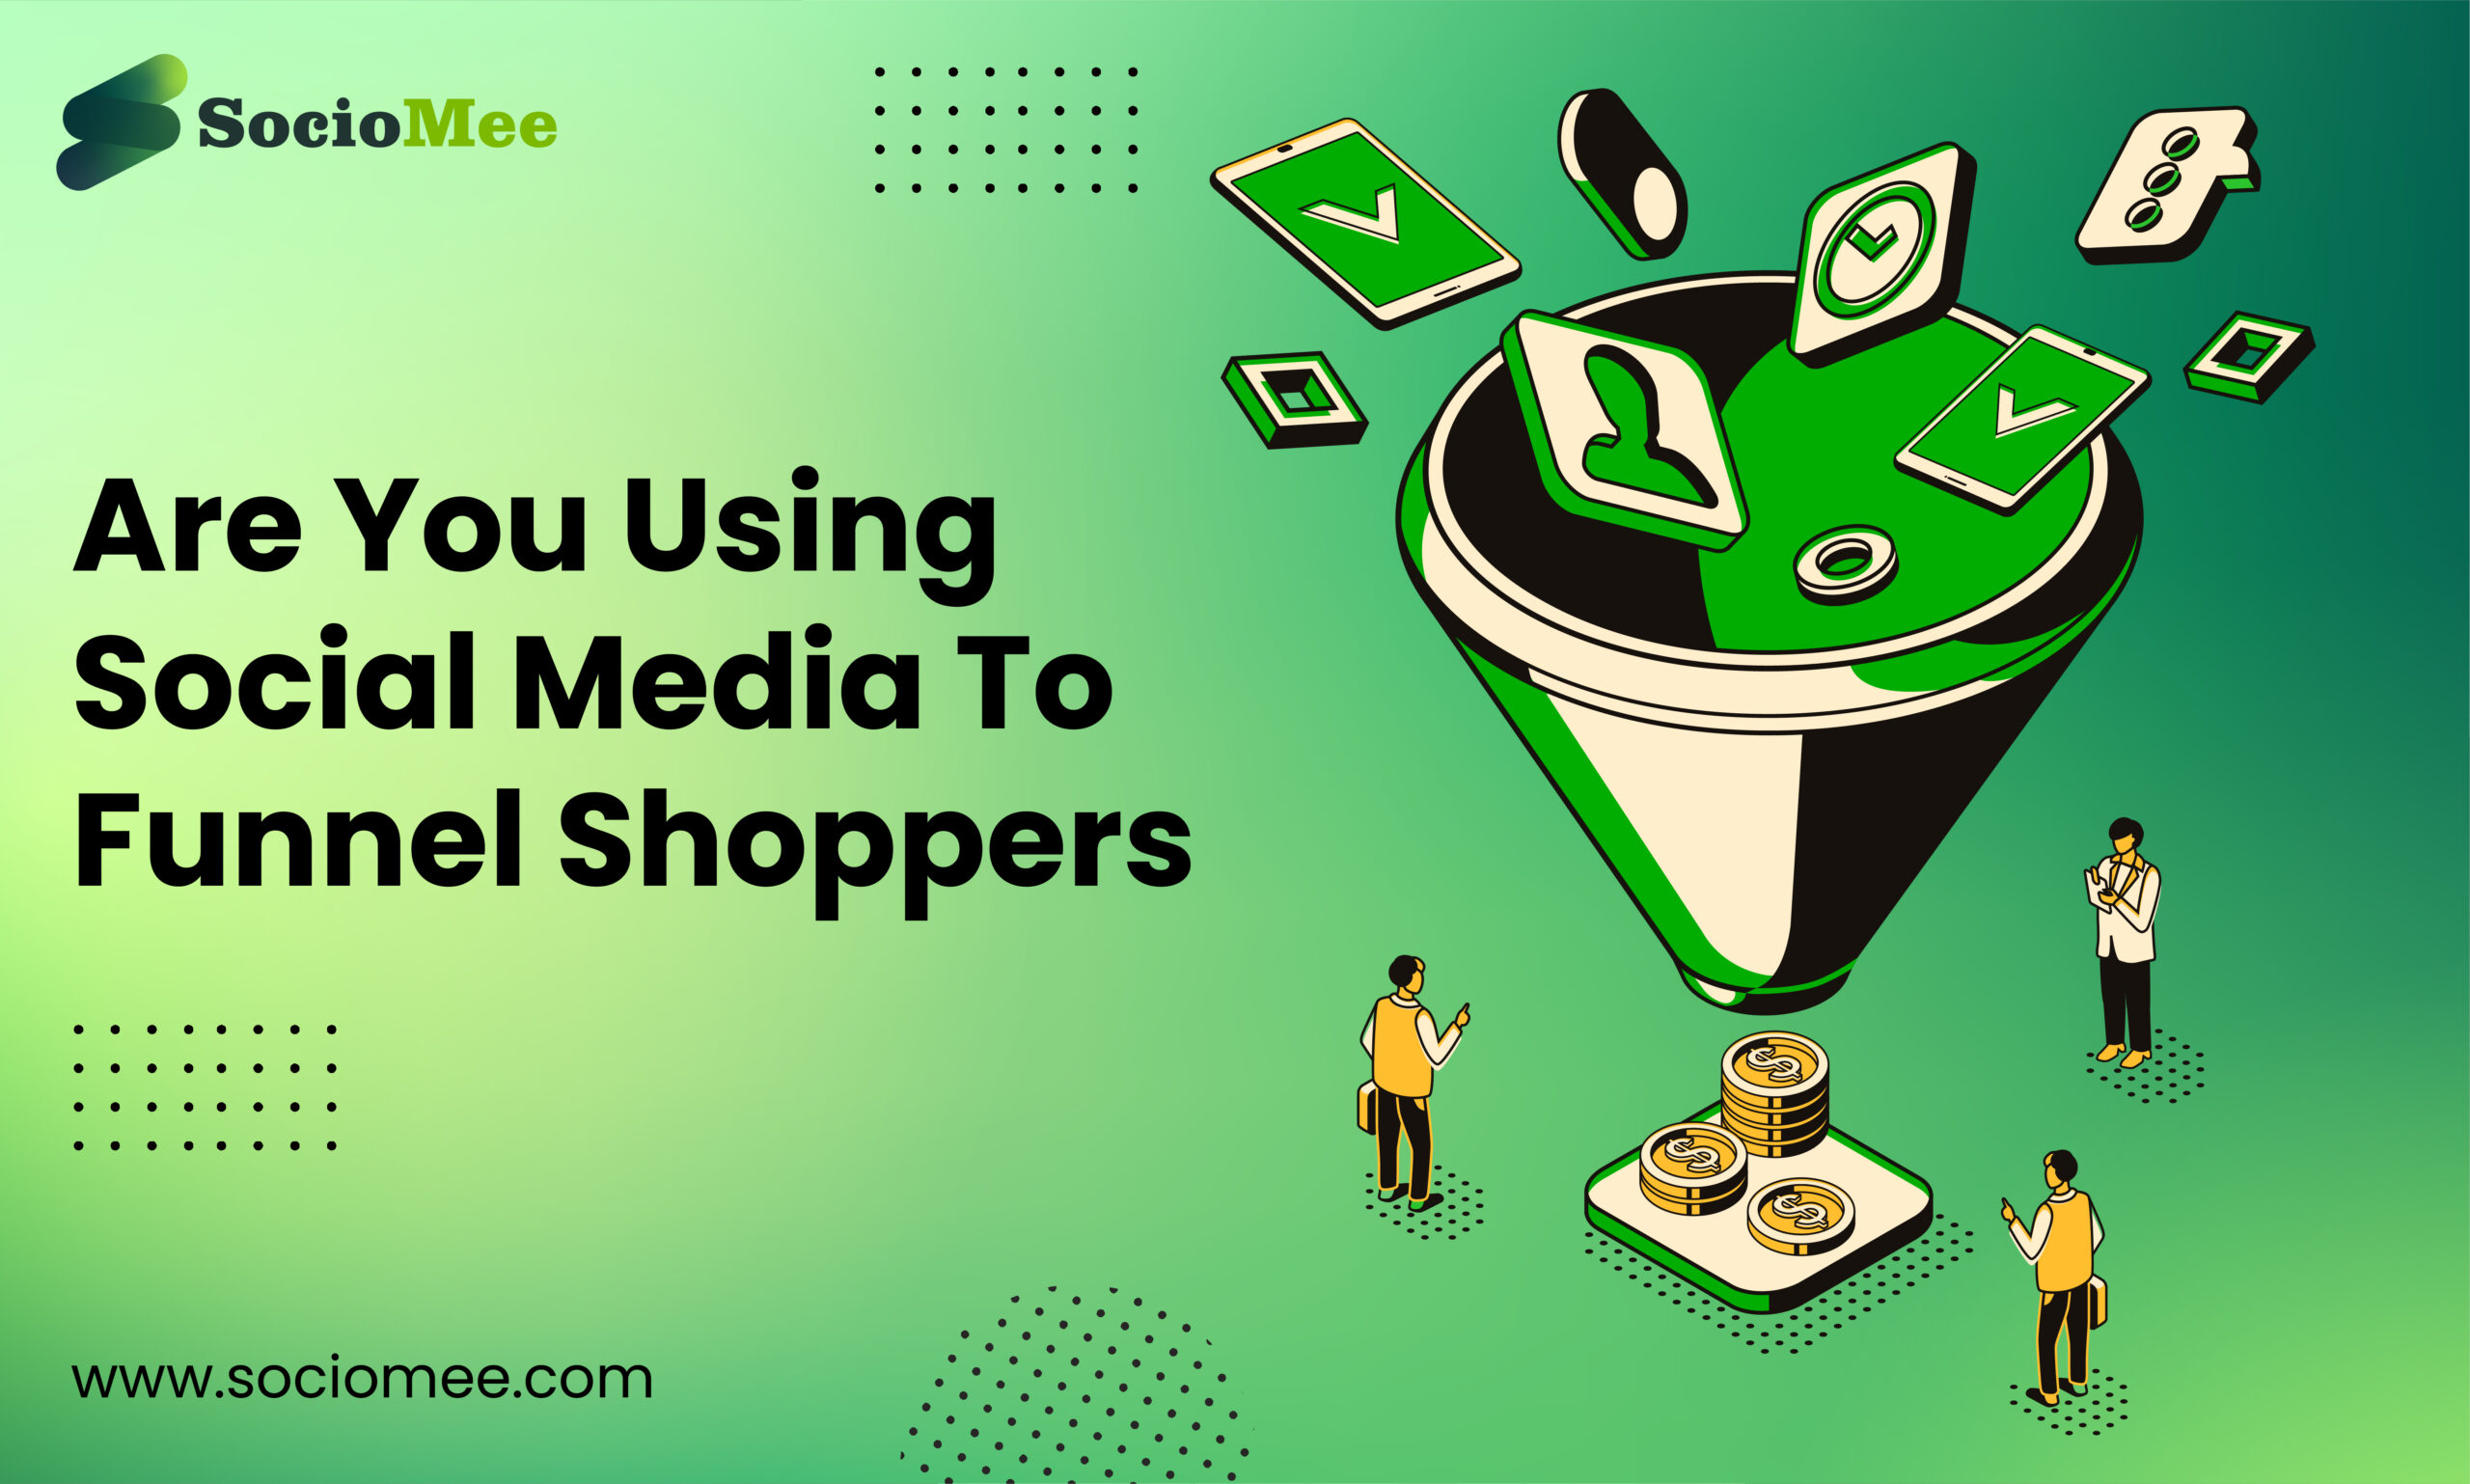 How Effectively Are You Using Social Media To Funnel Shoppers?